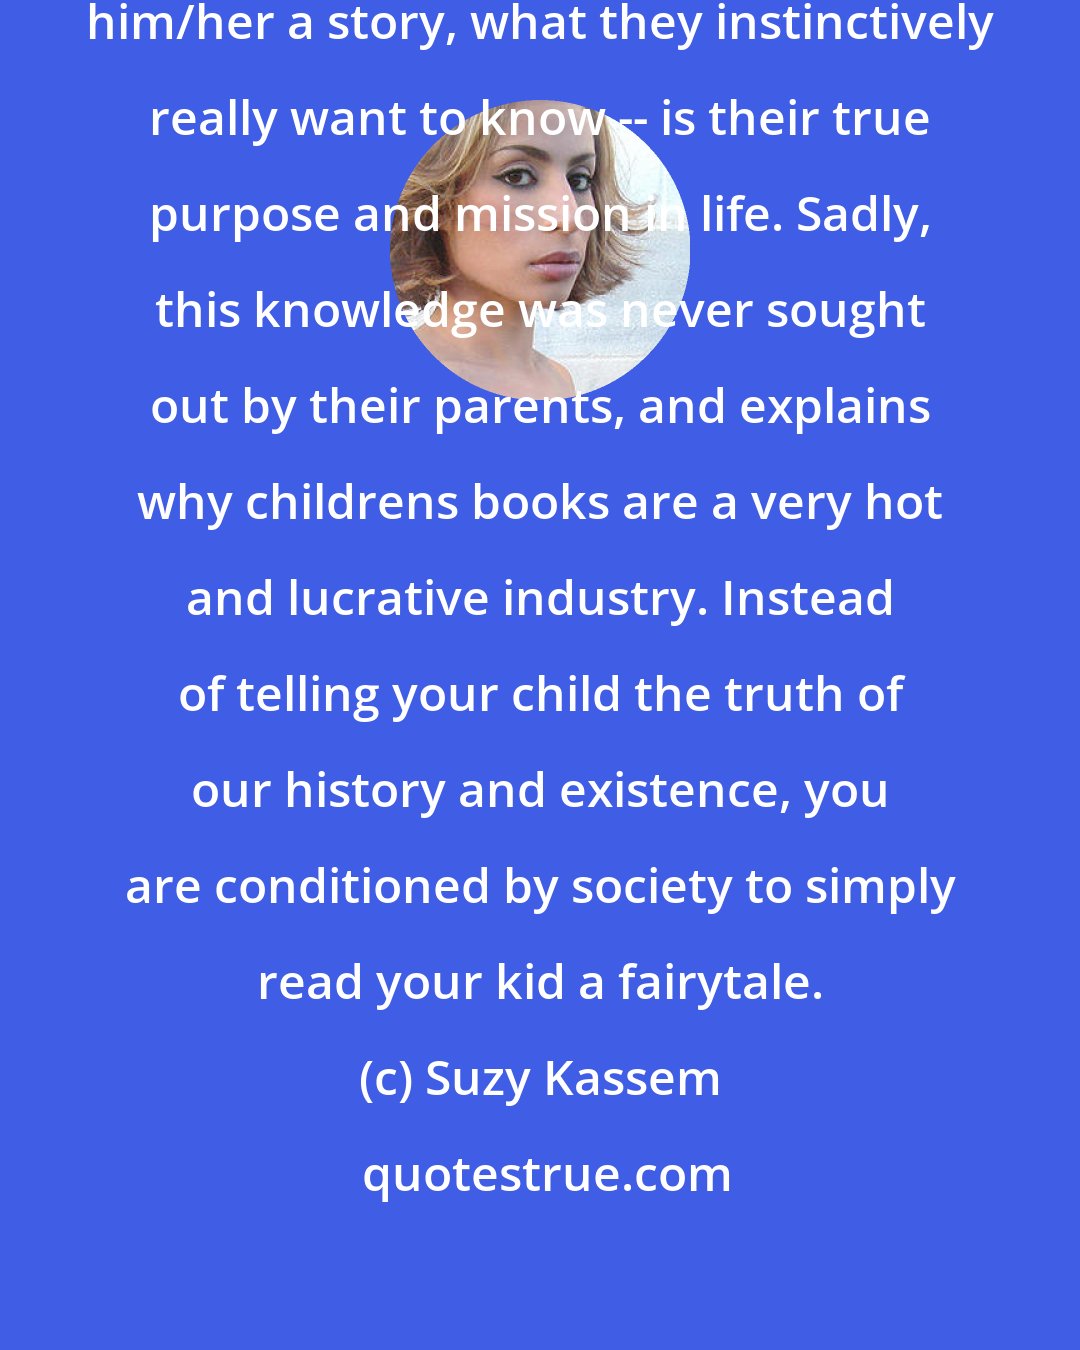 Suzy Kassem: When a child keeps asking you to tell him/her a story, what they instinctively really want to know -- is their true purpose and mission in life. Sadly, this knowledge was never sought out by their parents, and explains why childrens books are a very hot and lucrative industry. Instead of telling your child the truth of our history and existence, you are conditioned by society to simply read your kid a fairytale.